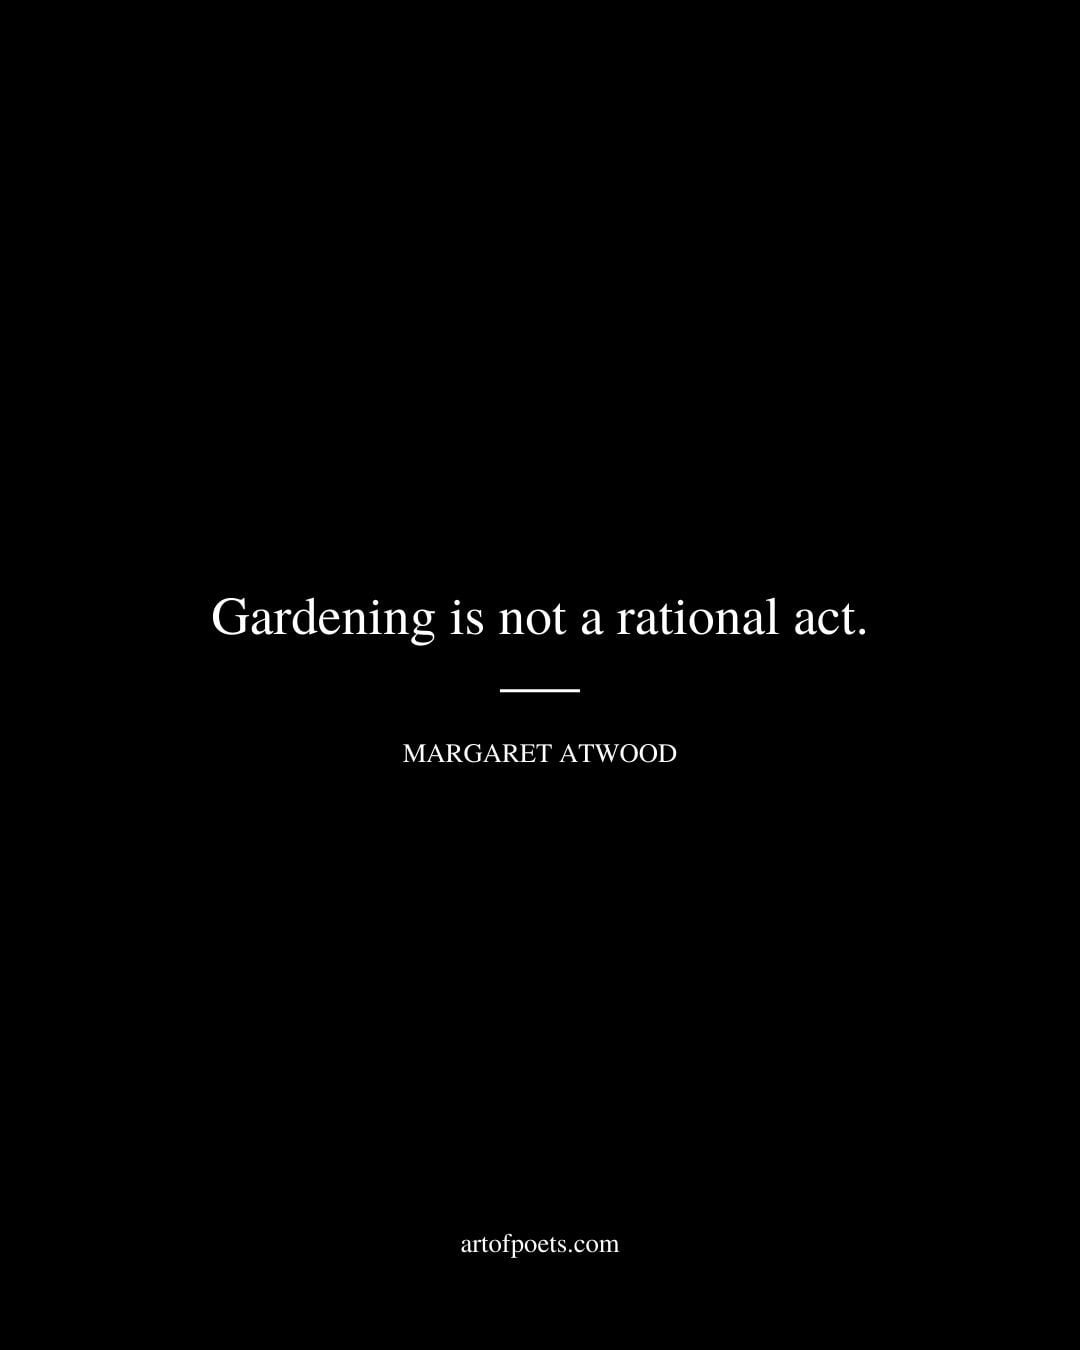 Gardening is not a rational act. Margaret Atwood